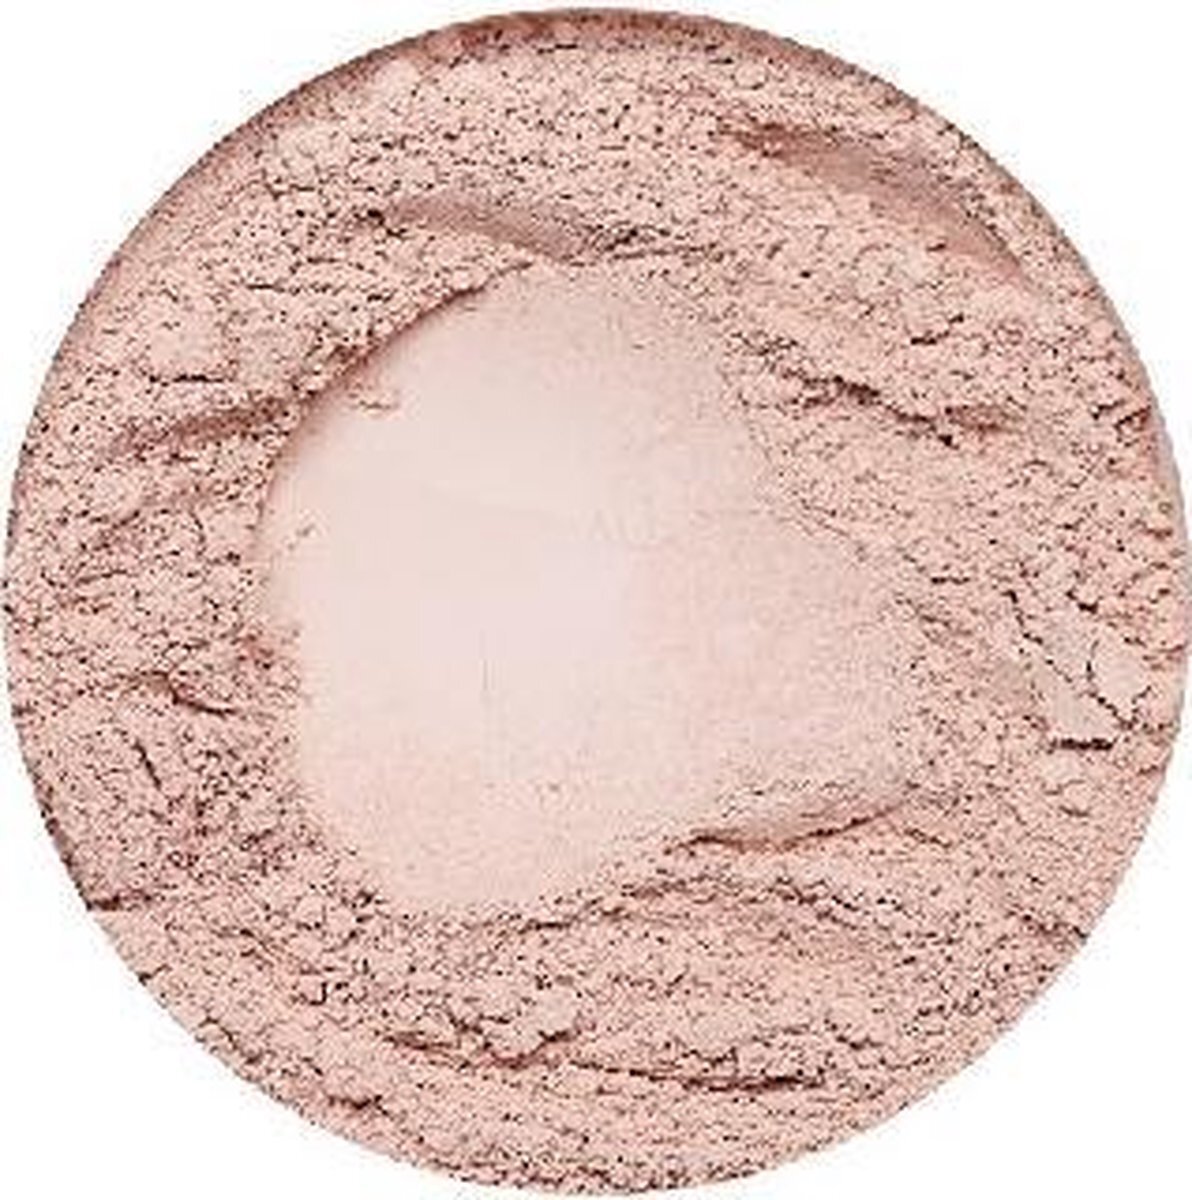 Annabelle Minerals Natural Light minerale corrector 4g